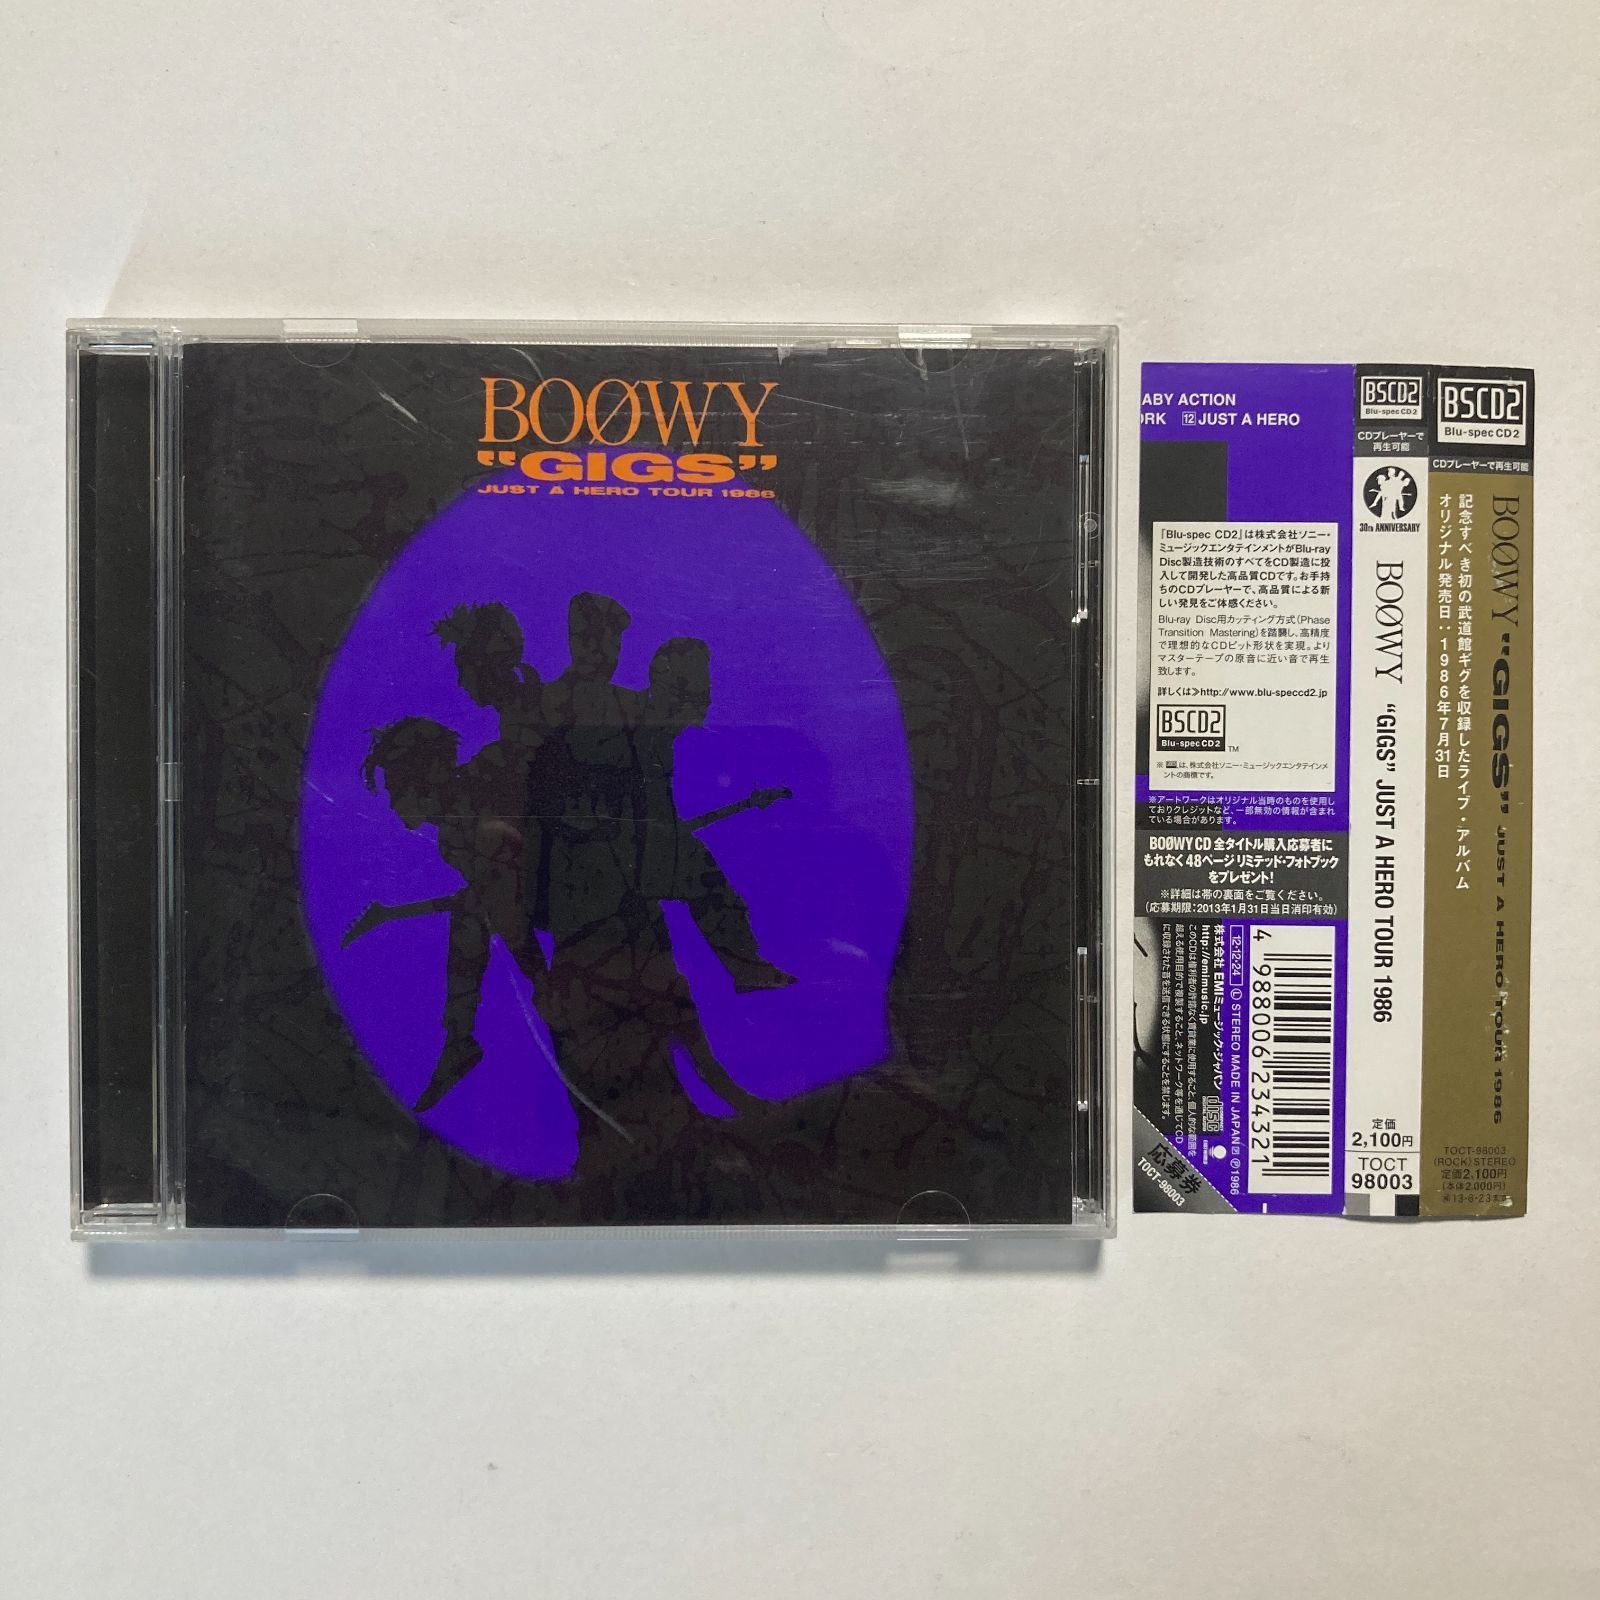 CD】BOØWY ボウイ / “GIGS” JUST A HERO TOUR 1986 Blu-spec CD TOCT